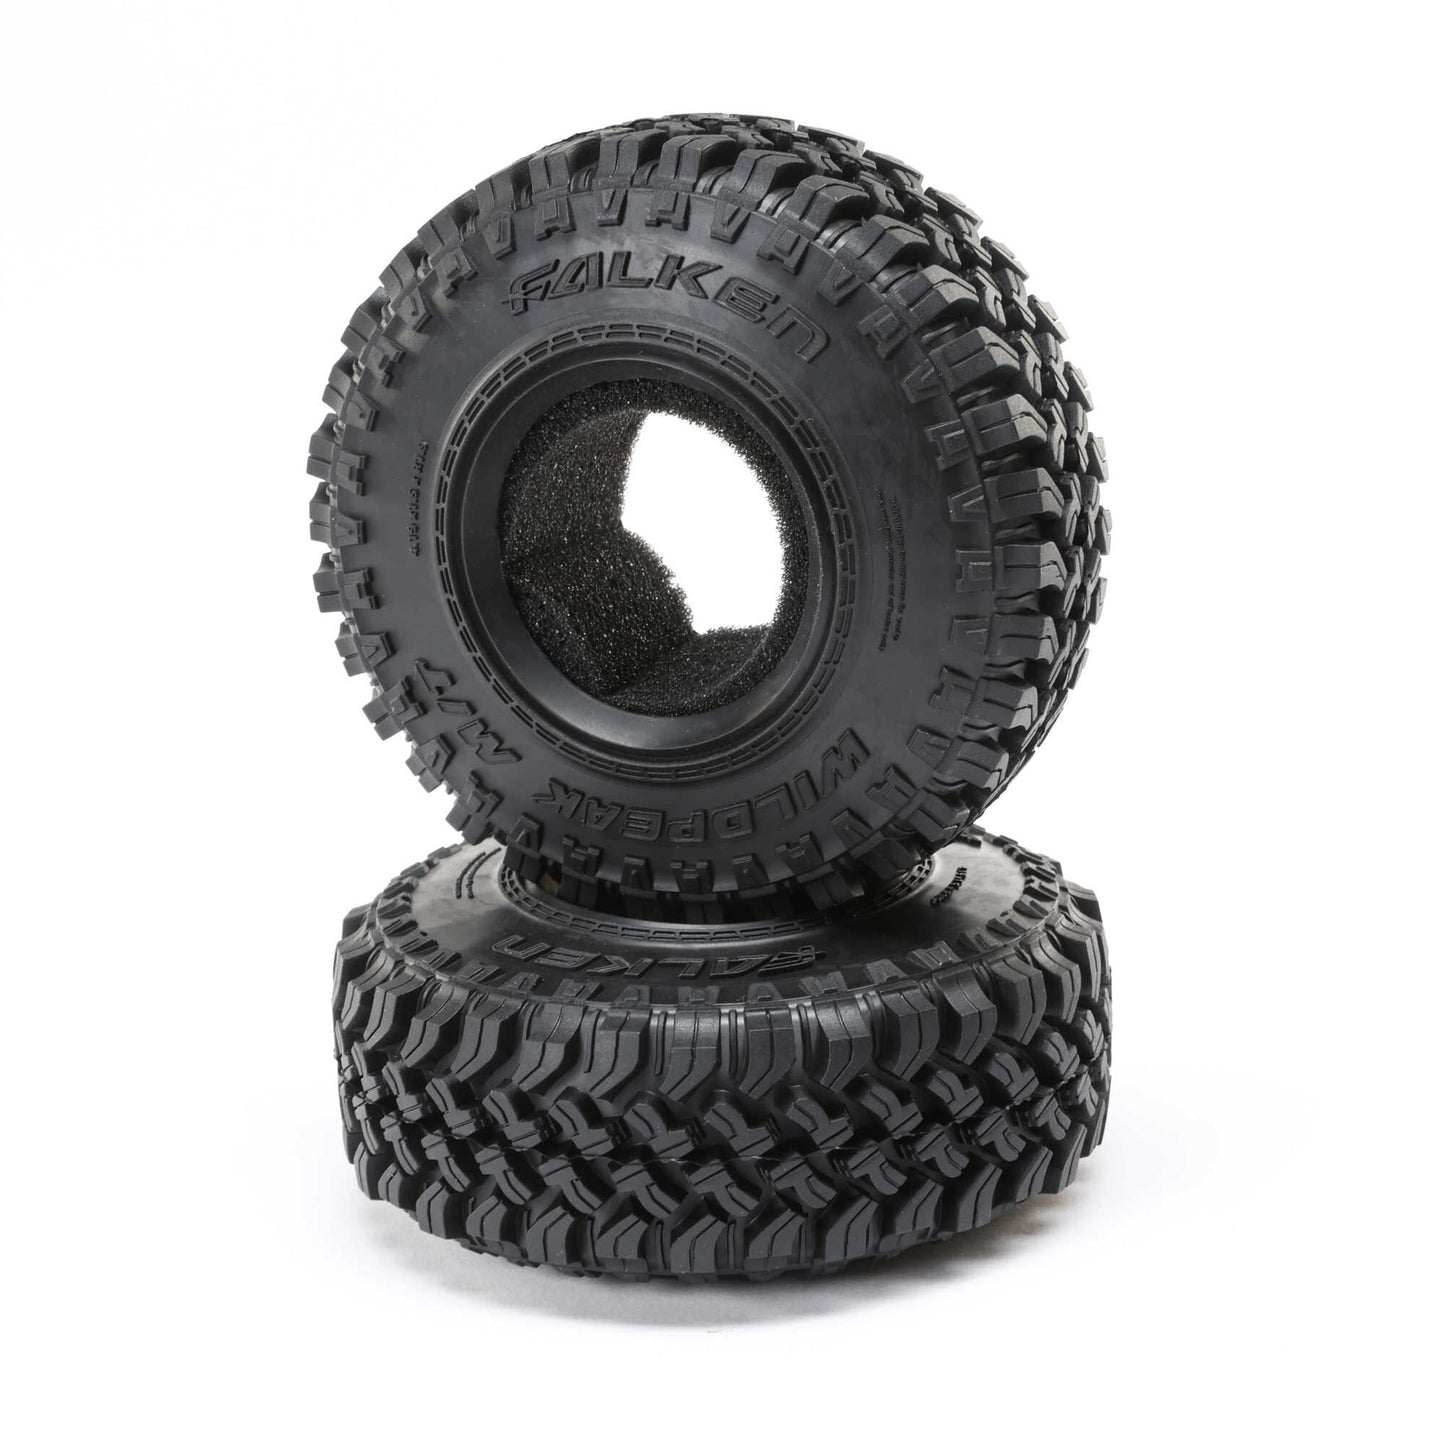 Axial AXI43016 1.9 Falken Wildpeak M/T 4.19" R35 Tires with Inserts (Pack of 2)